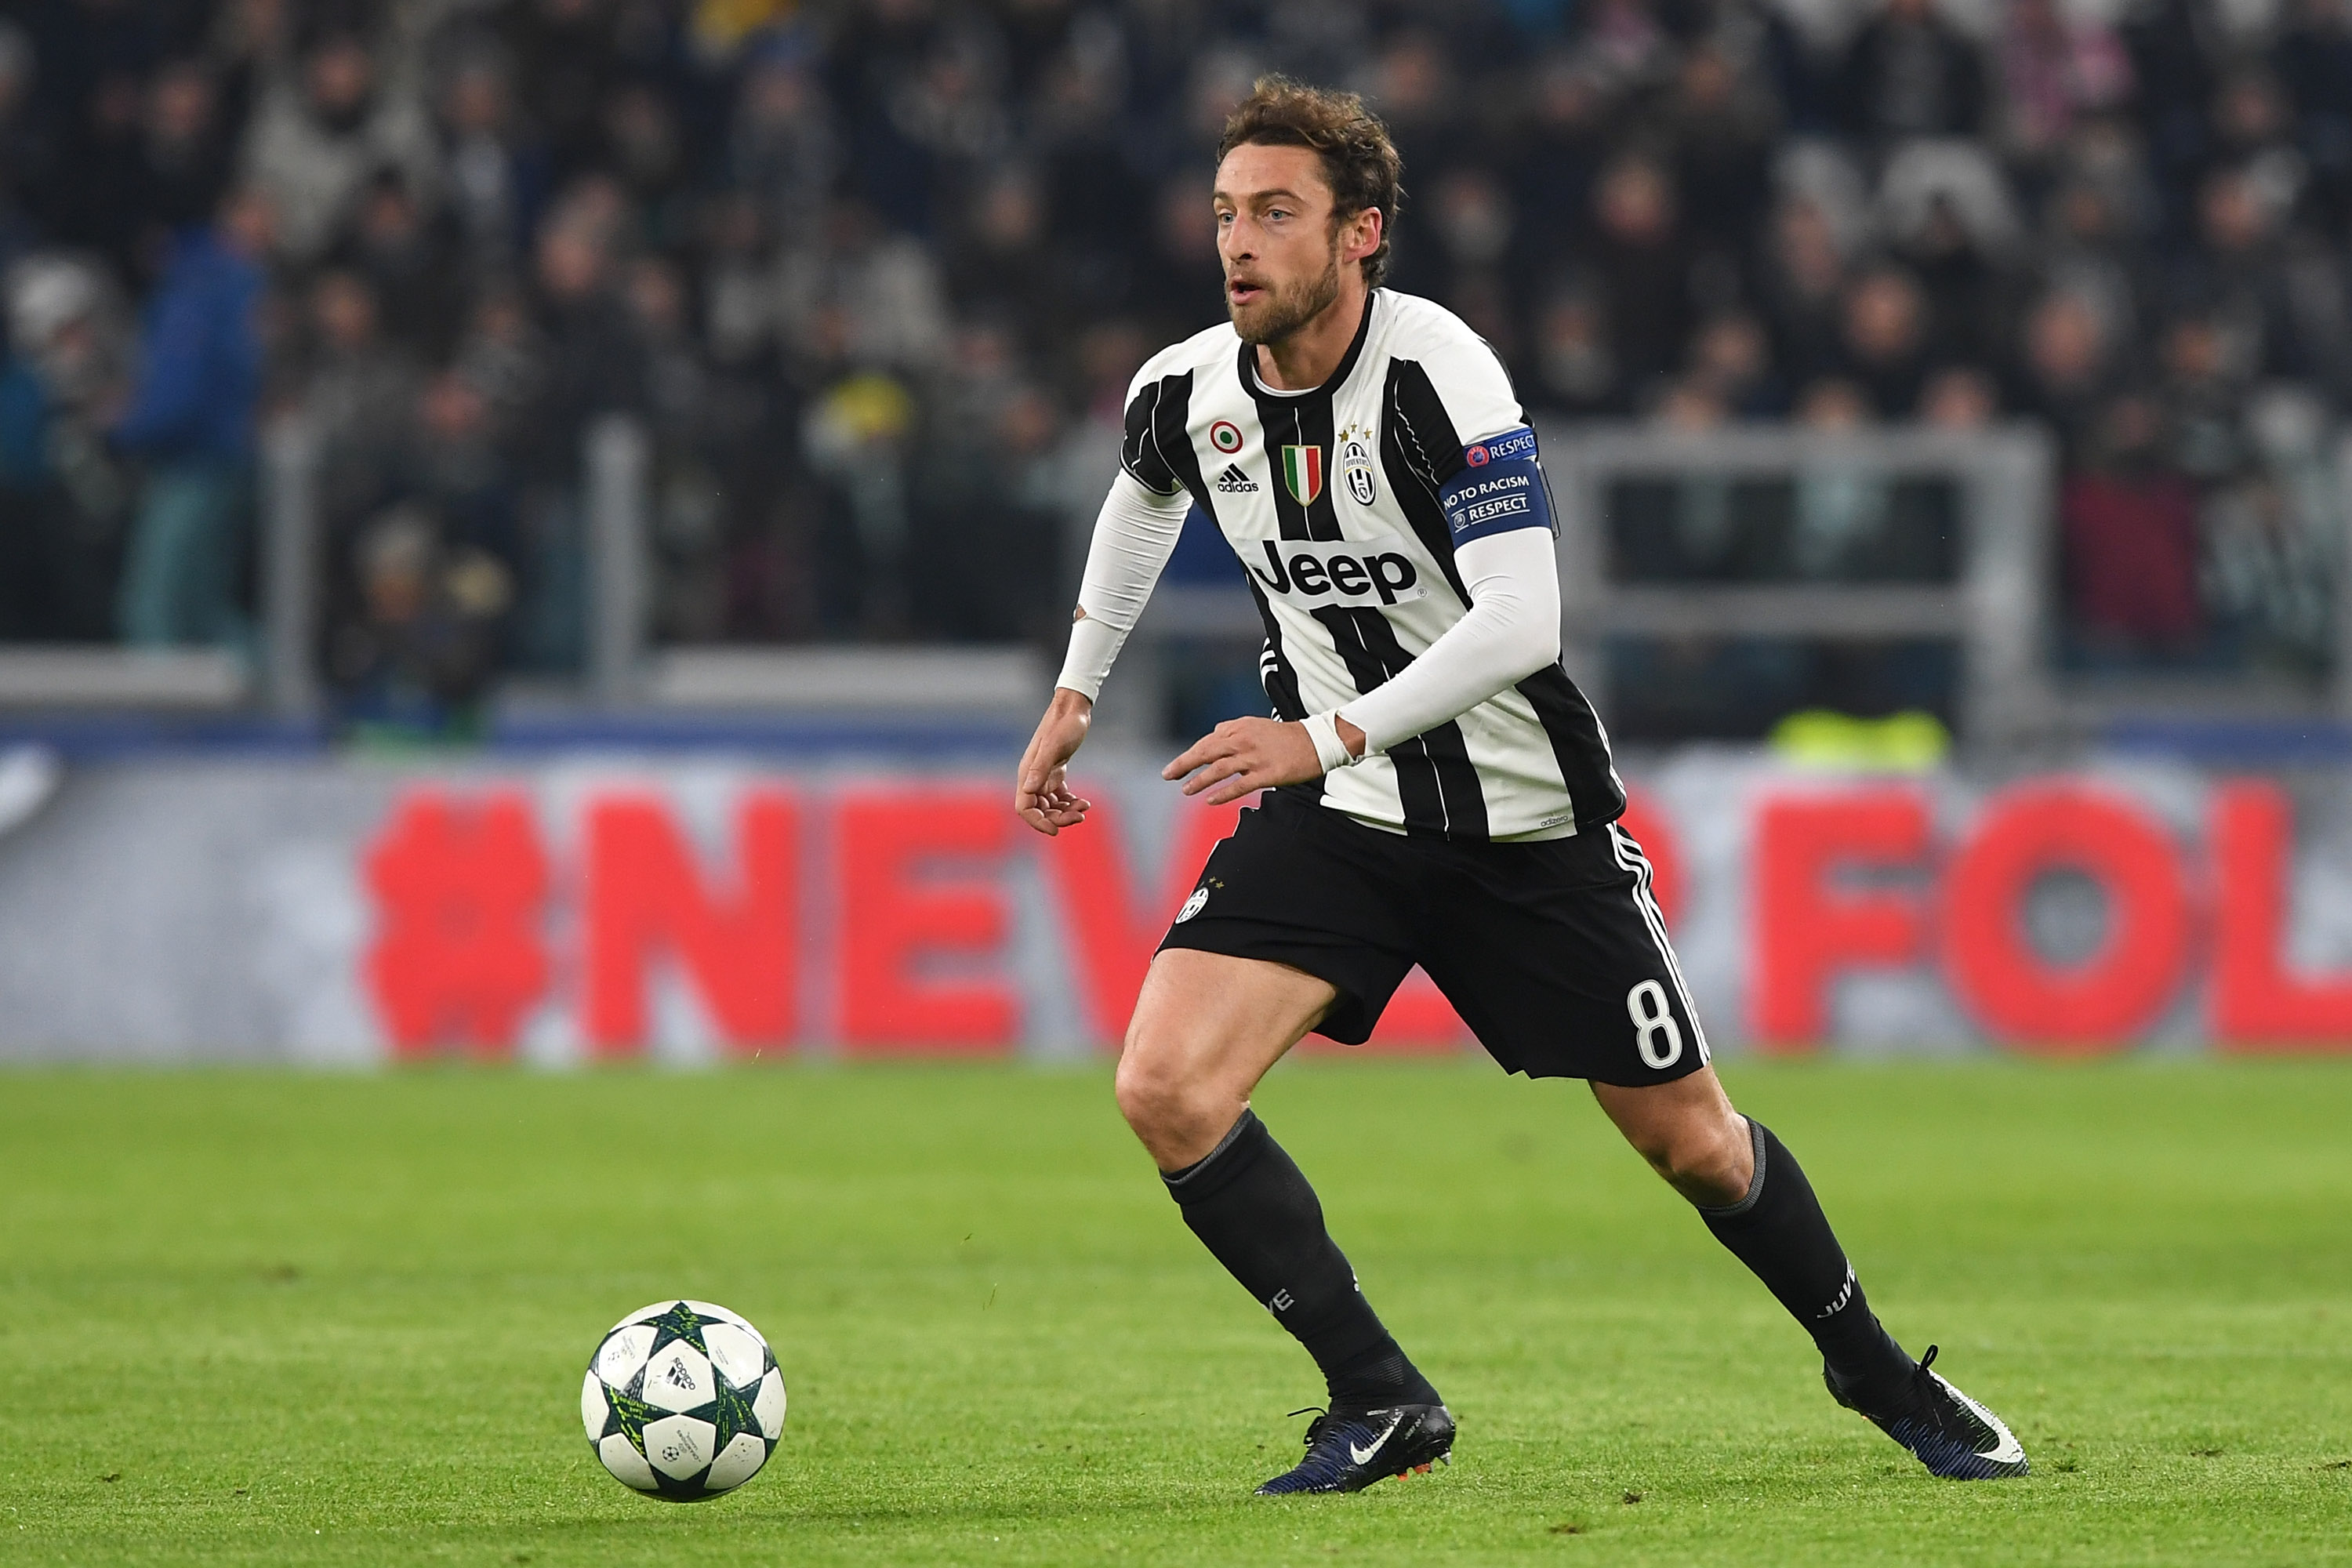 TURIN, ITALY - DECEMBER 07:  Claudio Marchisio of Juventus in action during the UEFA Champions League Group H match between Juventus and GNK Dinamo Zagreb at Juventus Stadium on December 7, 2016 in Turin.  (Photo by Valerio Pennicino/Getty Images)